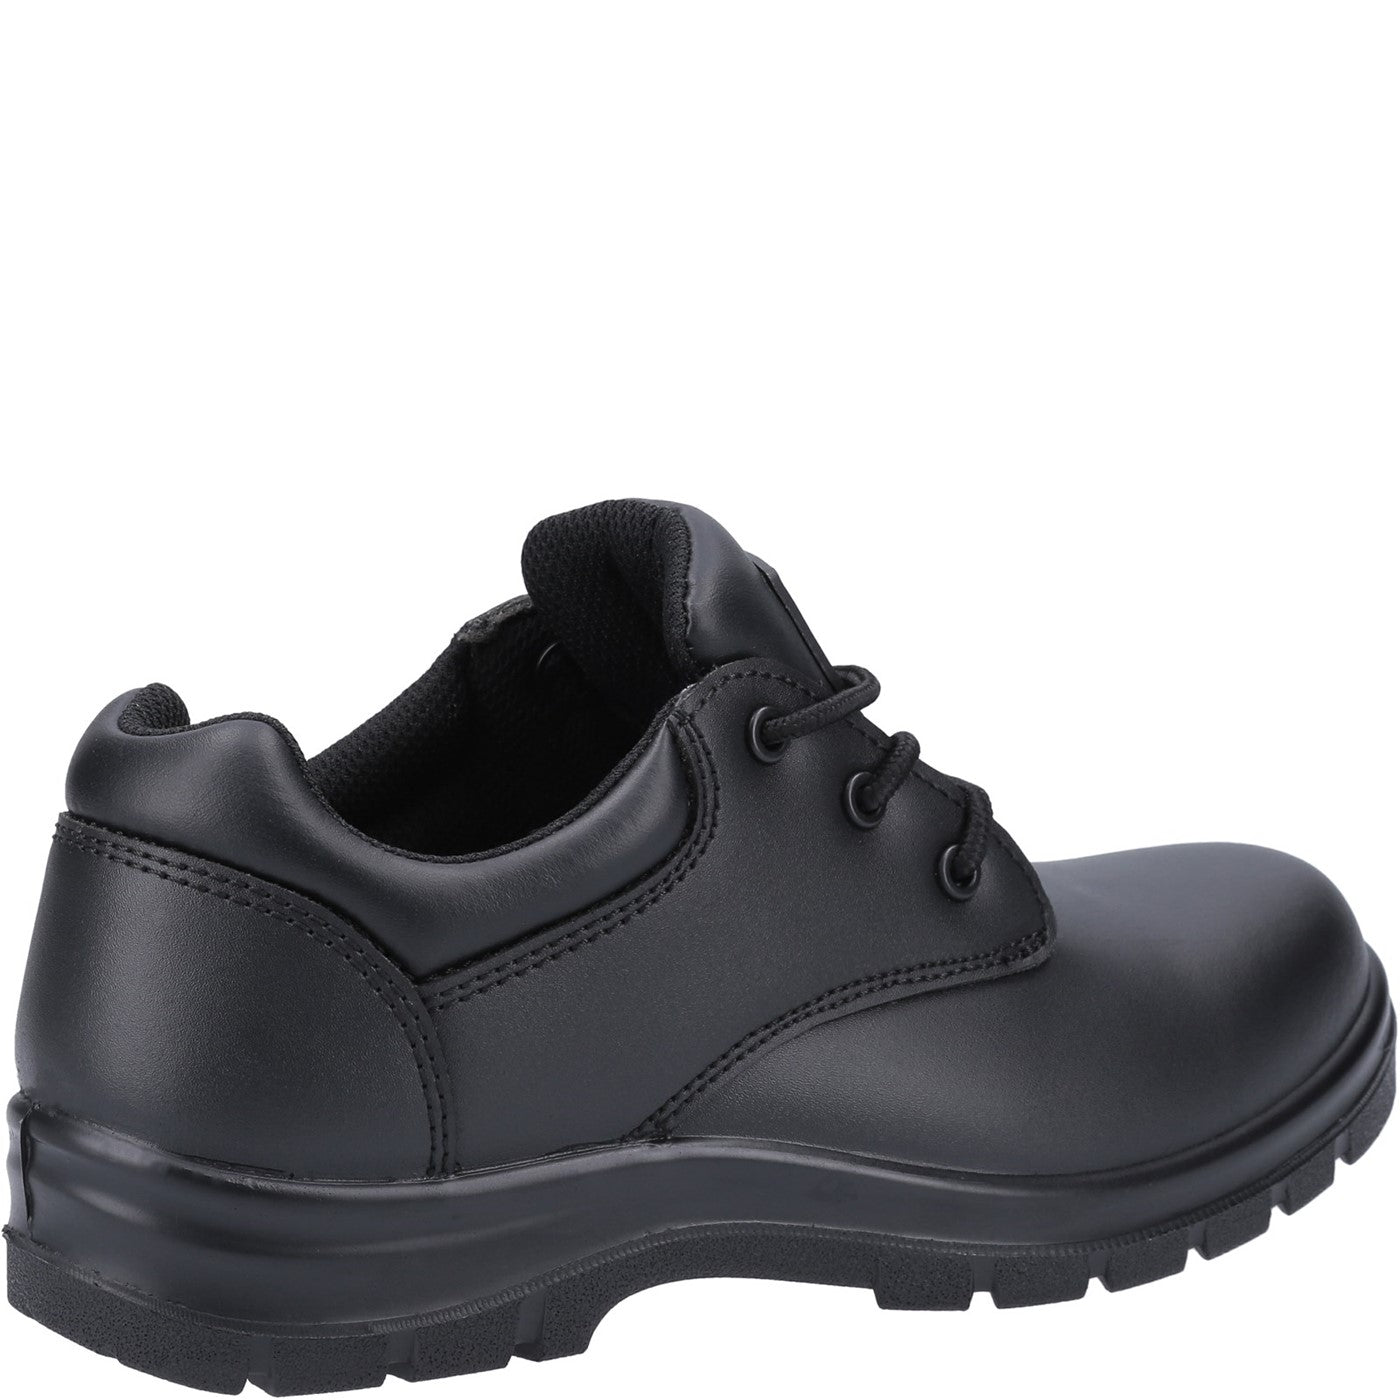 Women's Amblers Safety AS715C Safety Shoes